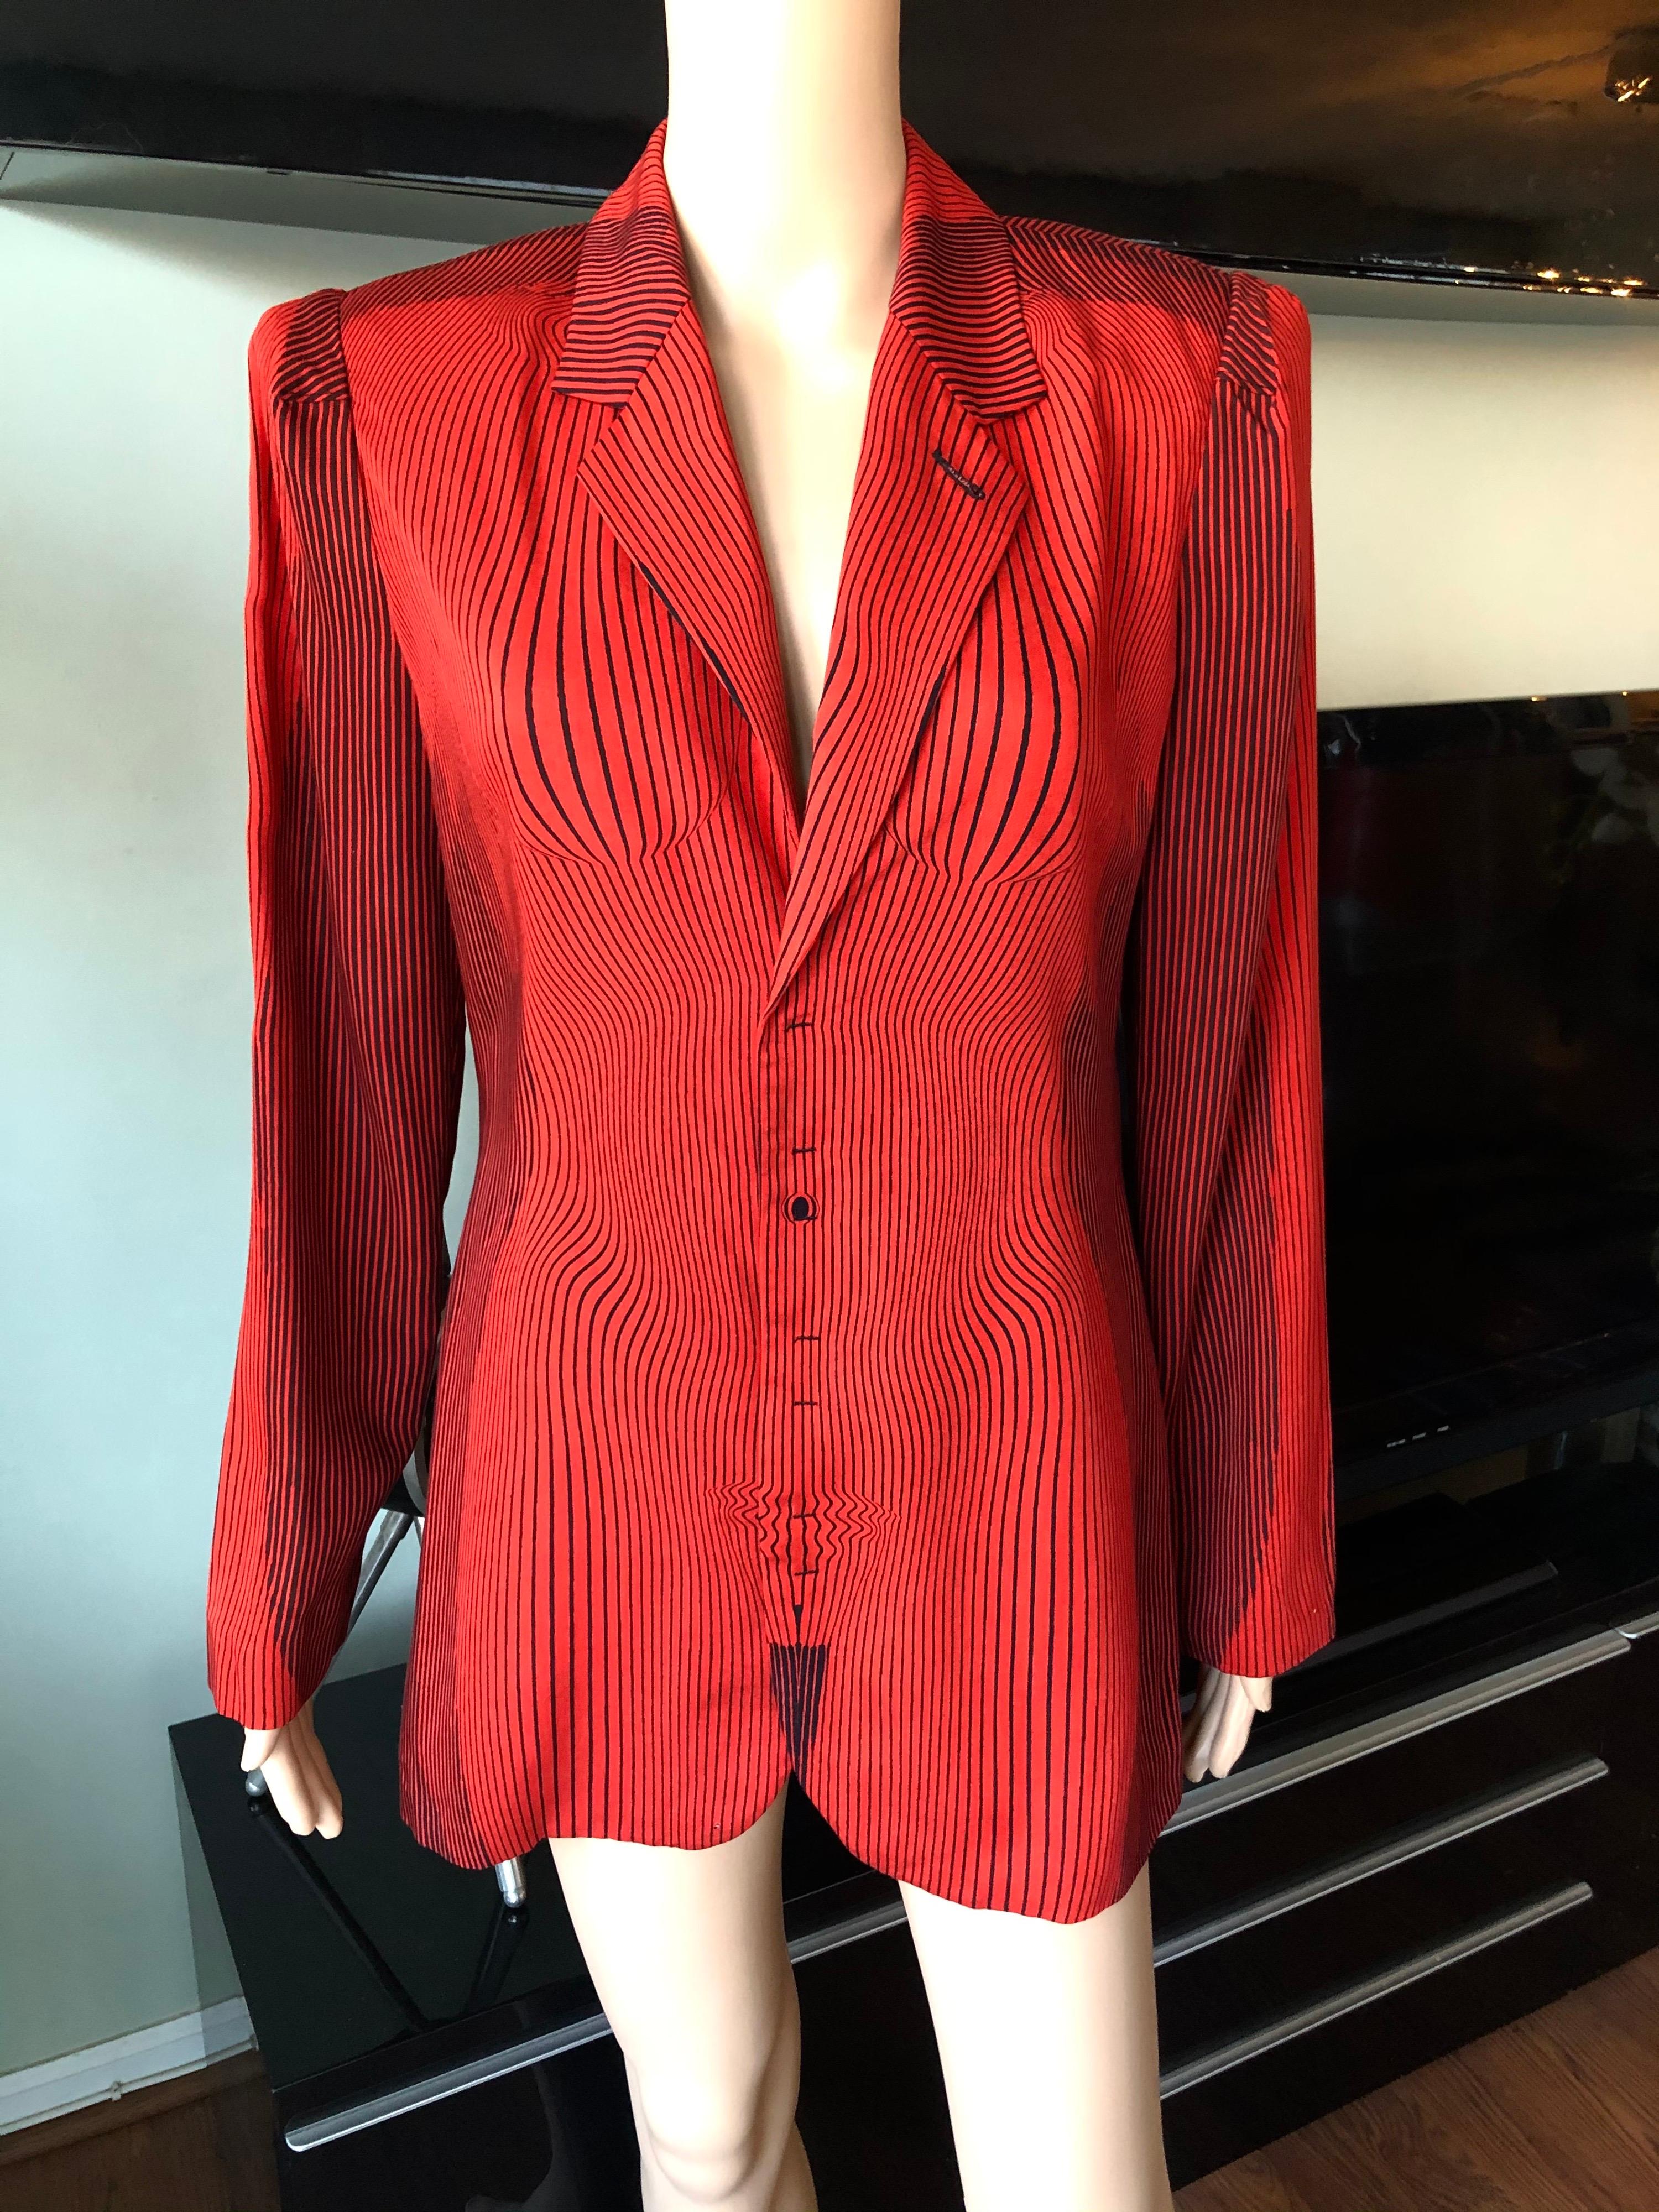 Red Jean Paul Gaultier S/S 1996 Vintage Cyberbaba Optical Illusion Jacket Blazer Top For Sale